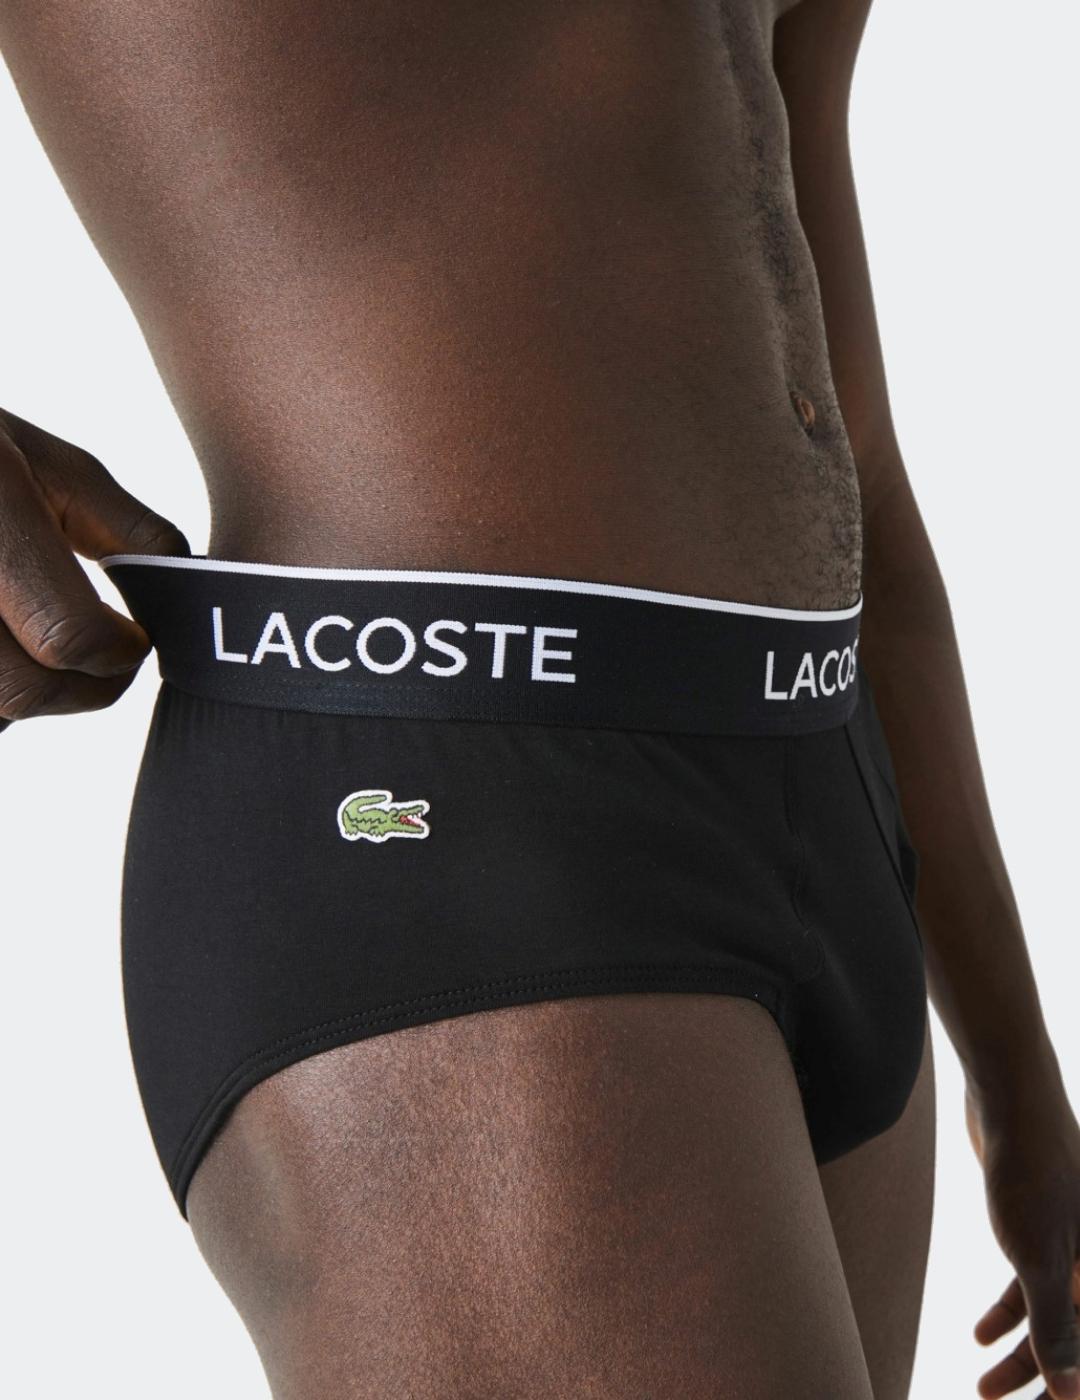 Pack Slips Lacoste negro para hombre